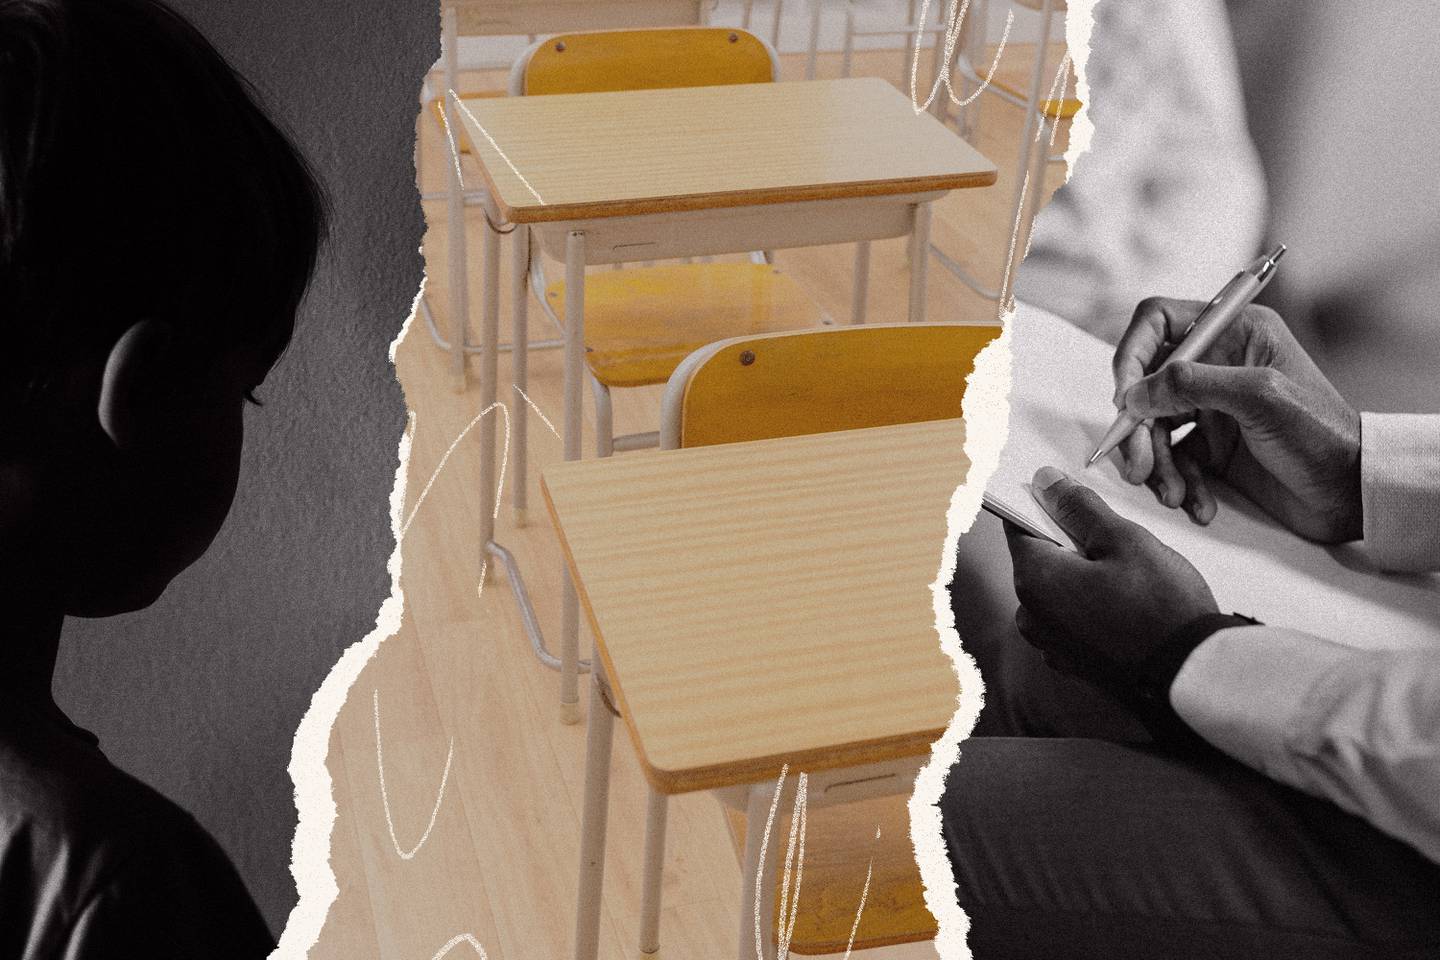 Photo collage showing silhouette of young forlorn boy, school desks, and therapist taking notes on clipboard.